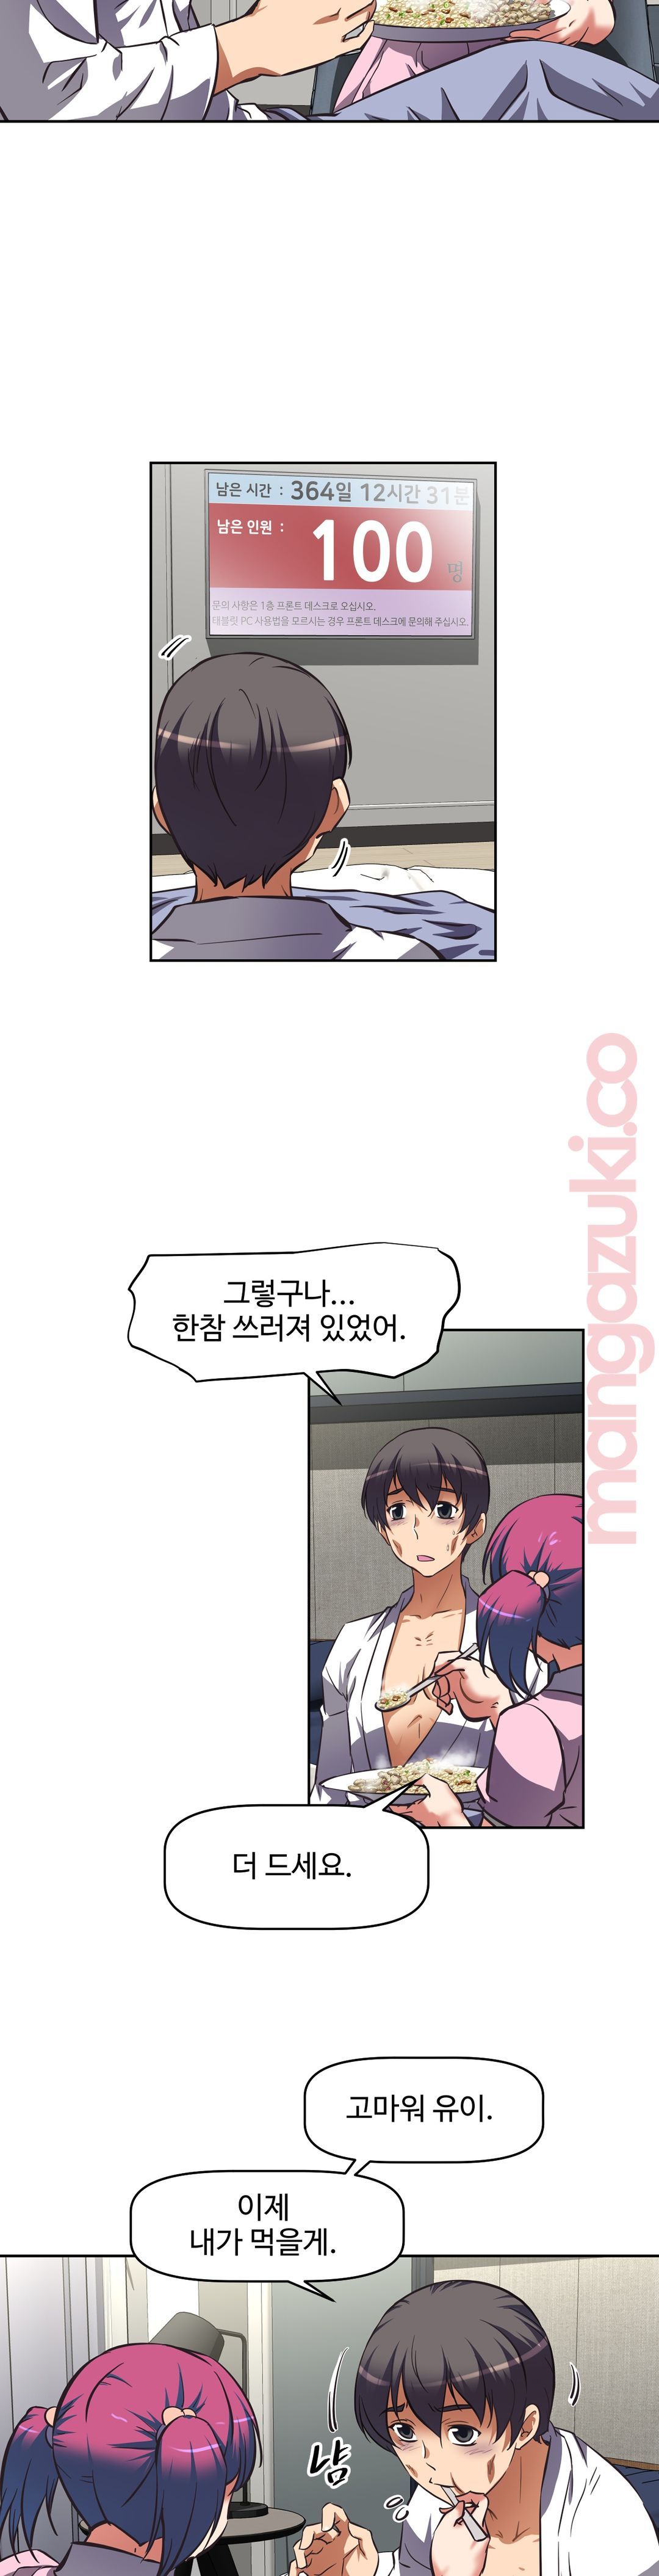 The Girls’ Nest Raw - Chapter 10 Page 6